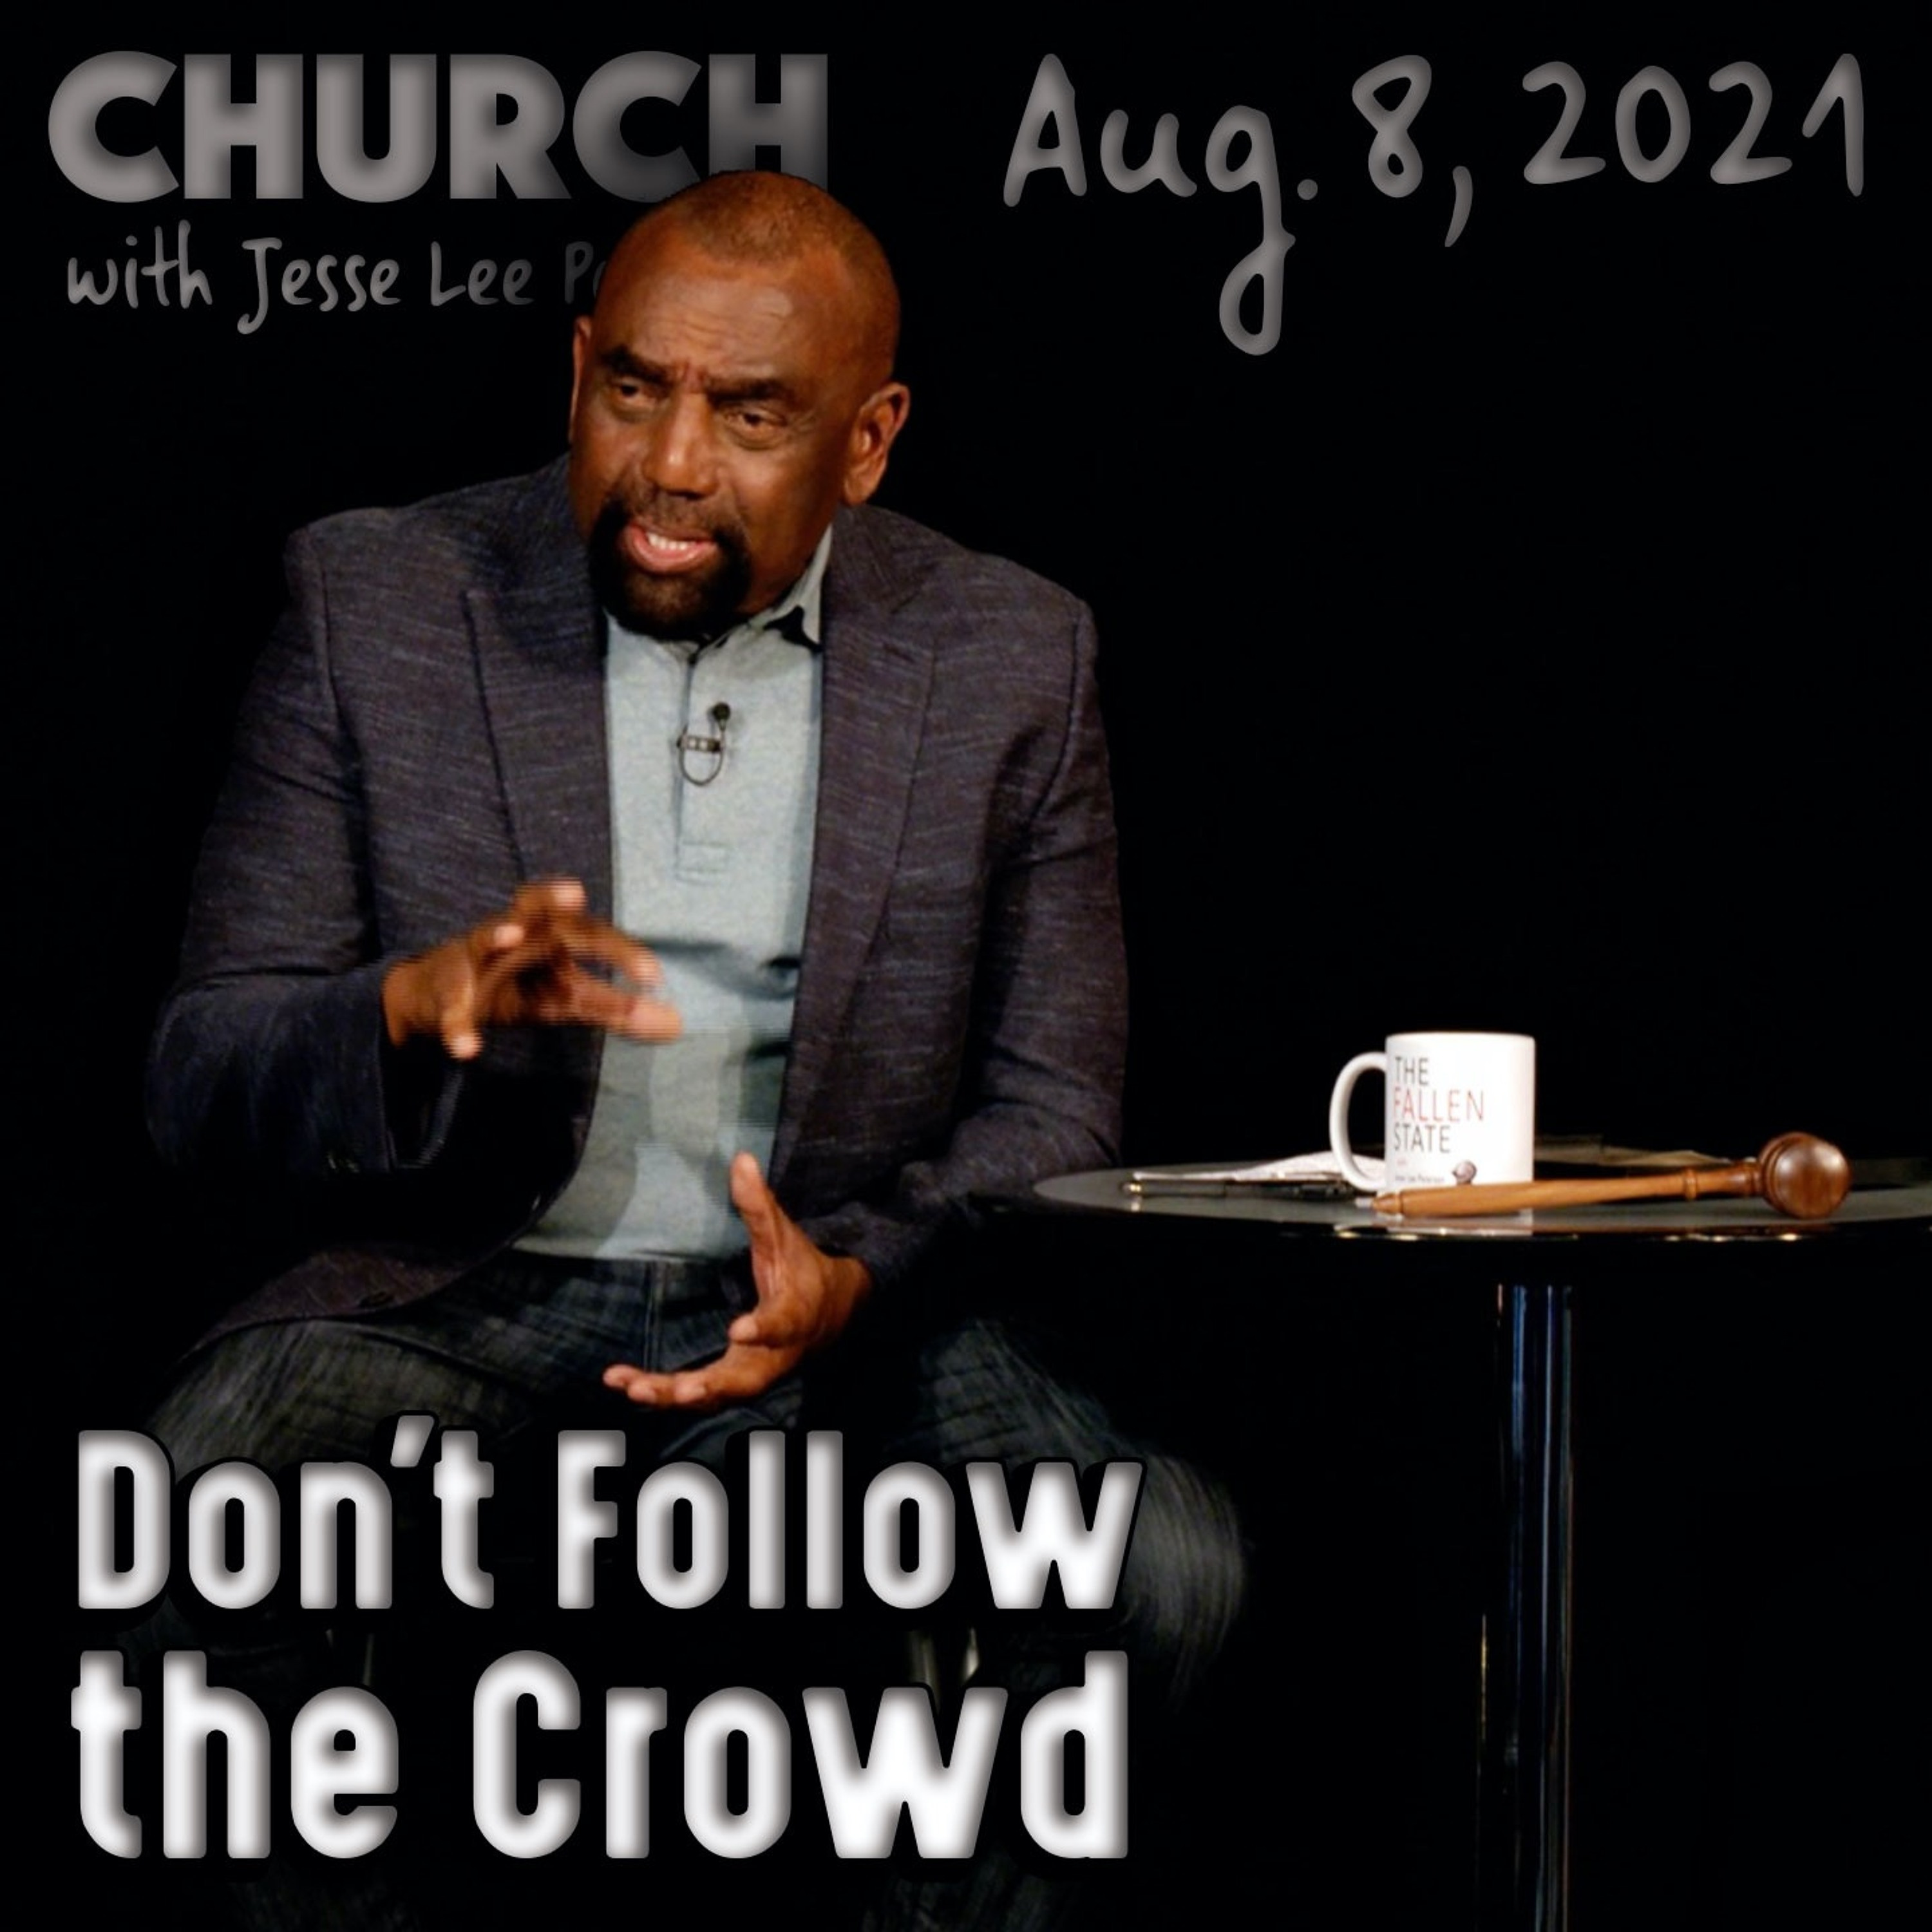 08/08/21 Are You an Individual? (Church)